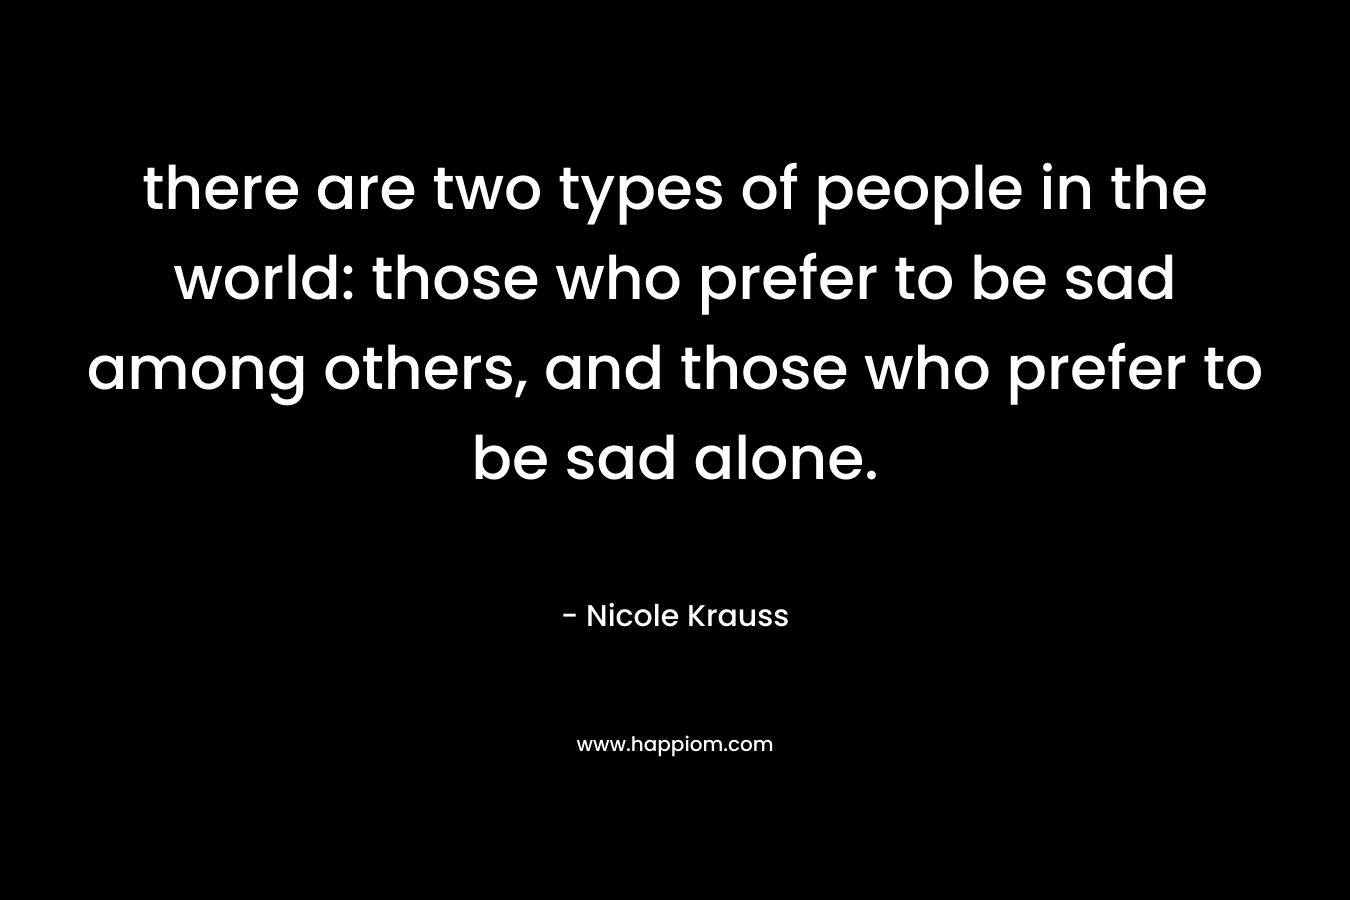 there are two types of people in the world: those who prefer to be sad among others, and those who prefer to be sad alone. – Nicole Krauss